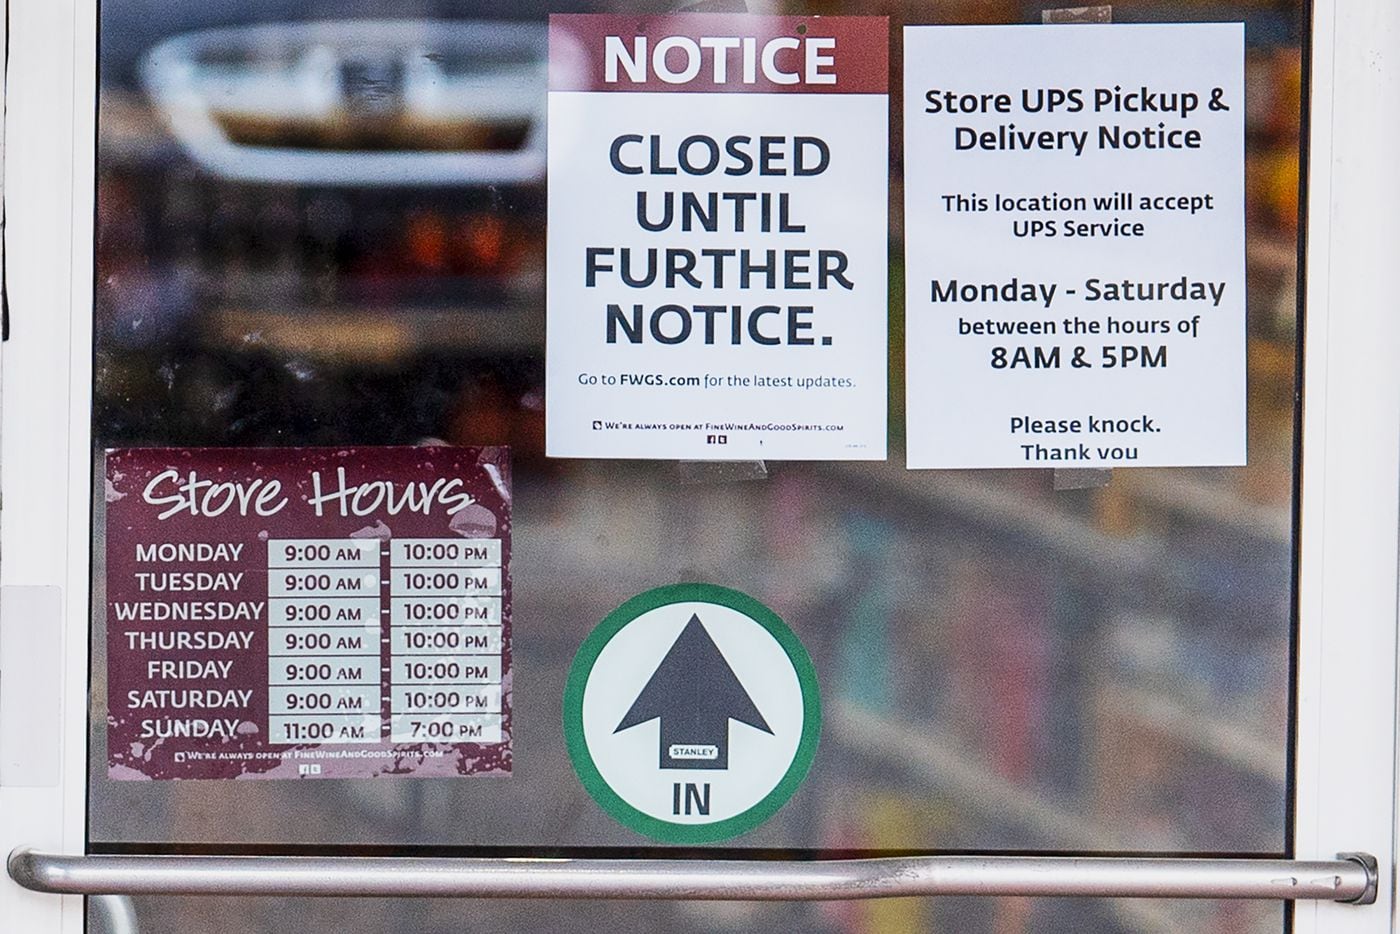 Pa. liquor stores are open for curbside pickup. Here's how ...